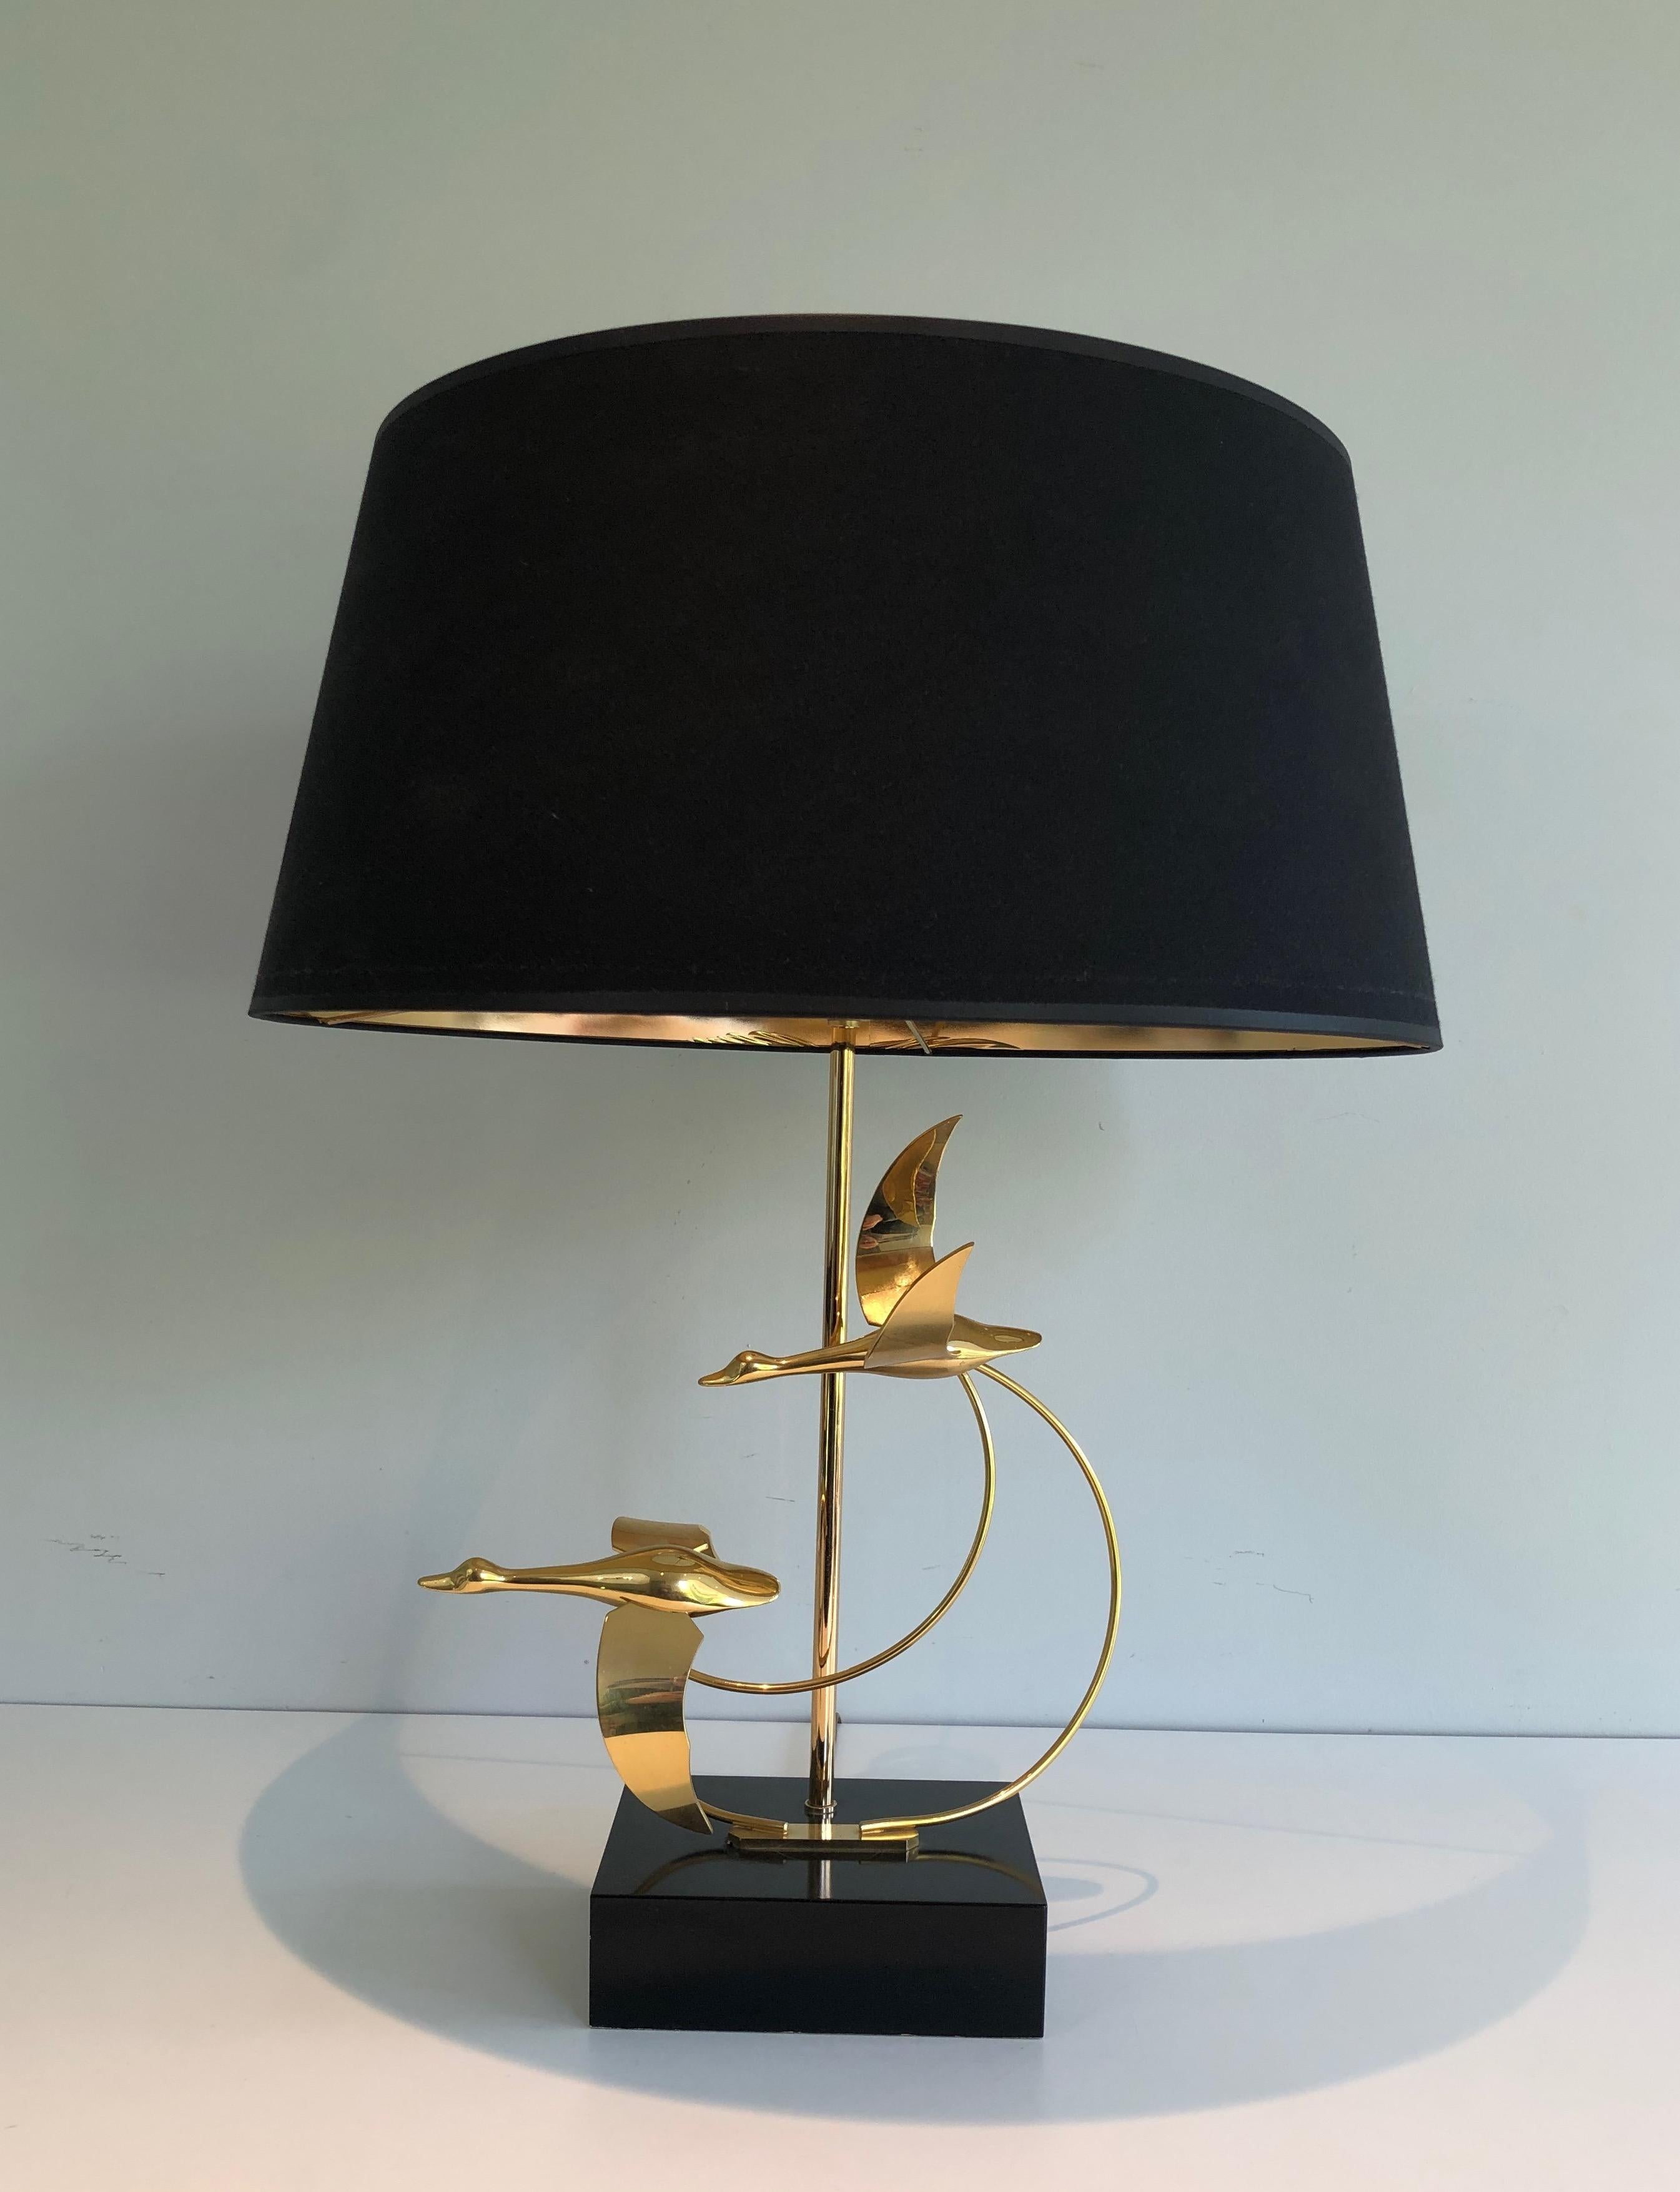 Flock of Wild Geese Brass Table Lamp, French, circa 1970 For Sale 6